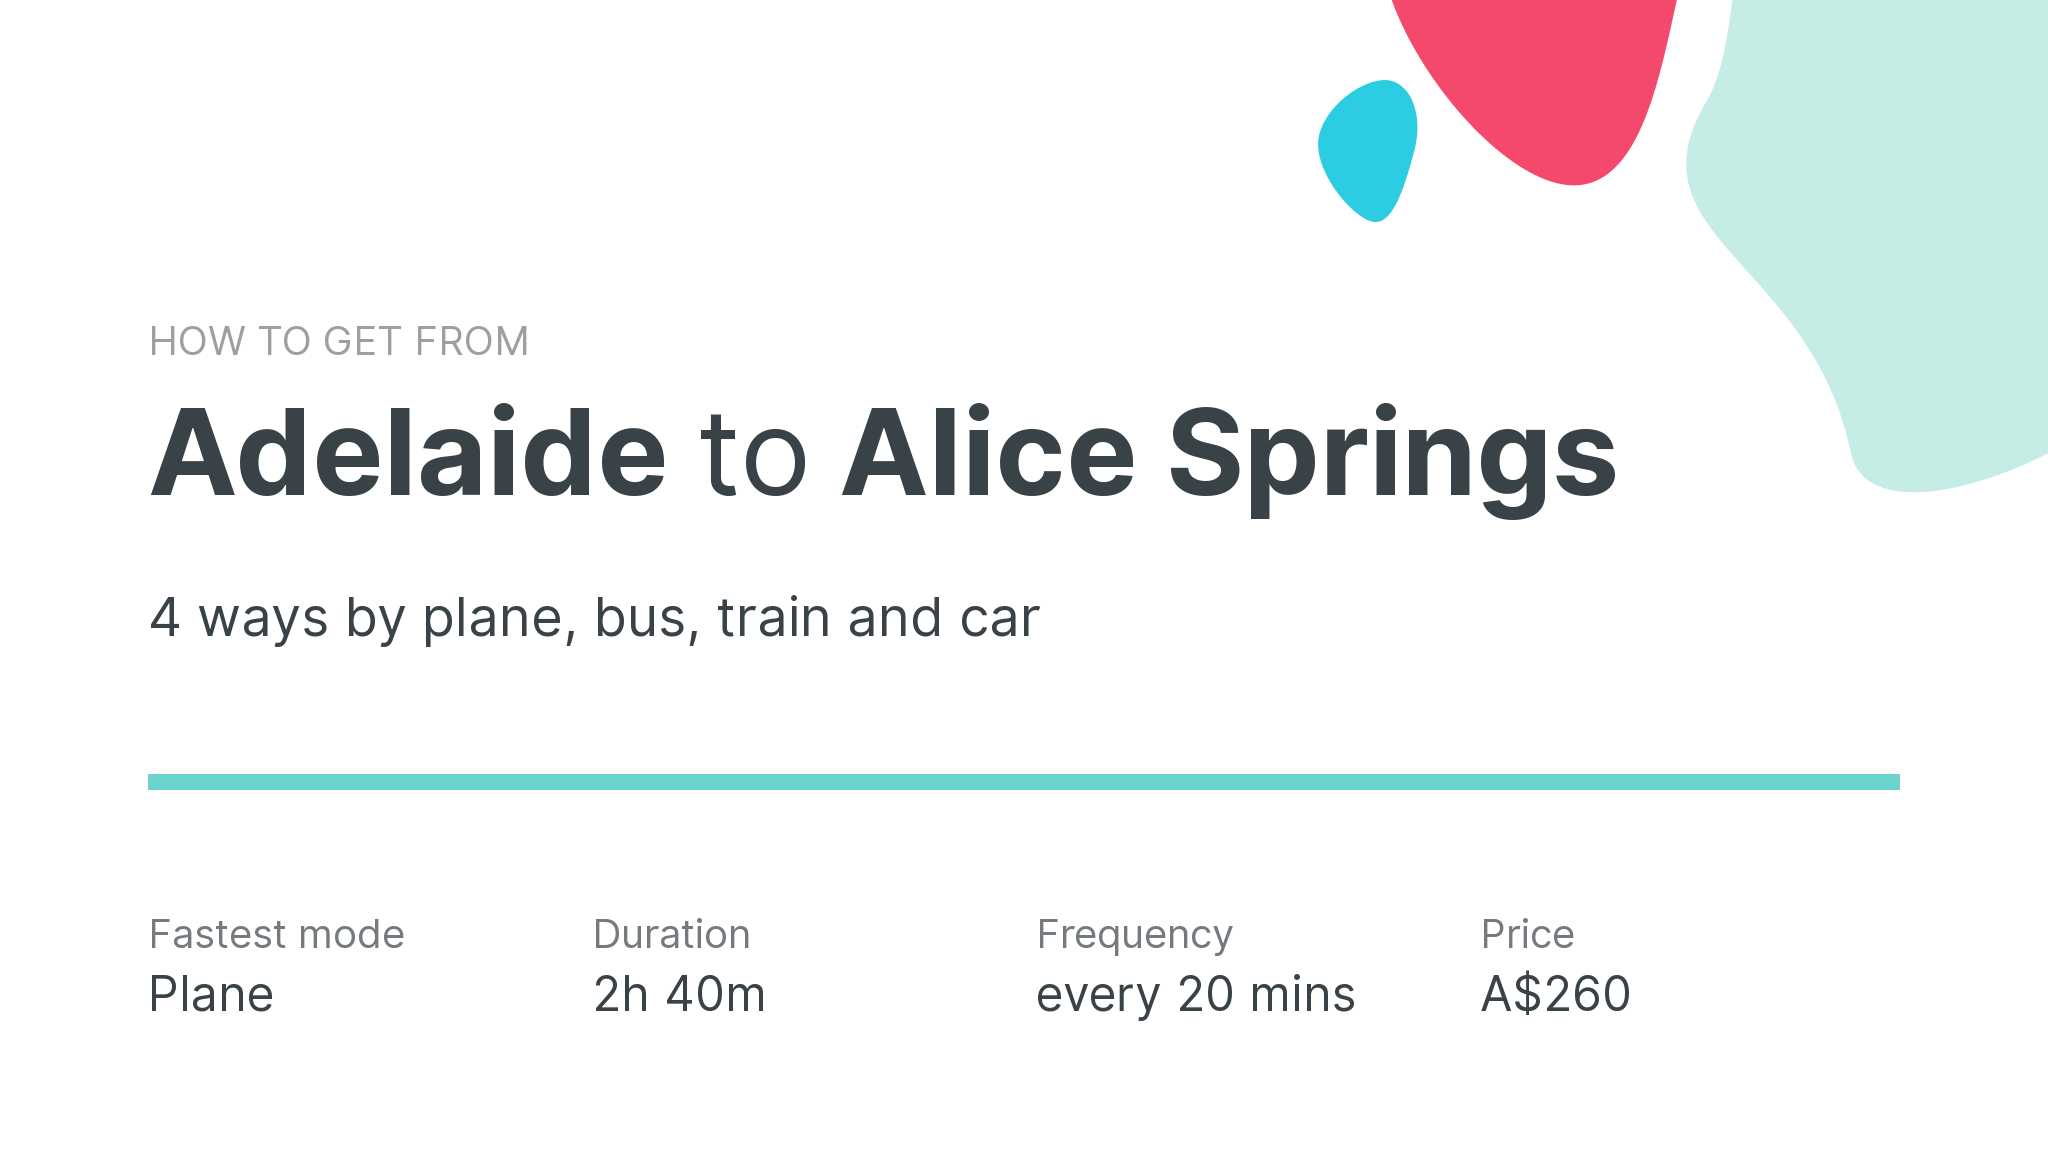 How do I get from Adelaide to Alice Springs